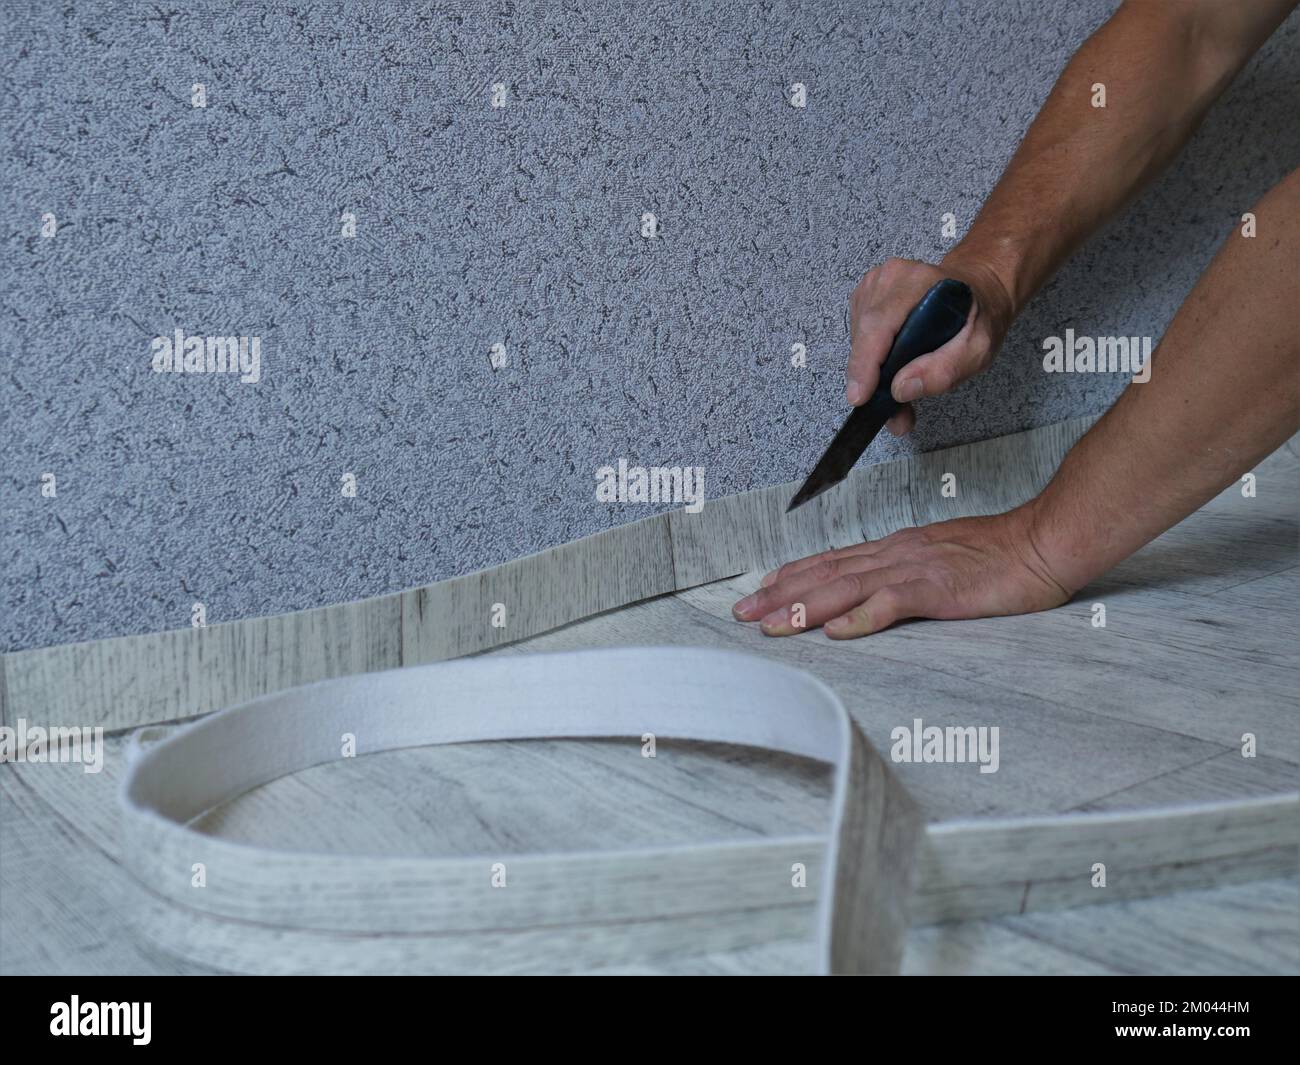 a person cuts a piece of light-colored linoleum with a wooden texture pattern on the floor in a room against a wall with gray wallpaper with a knife Stock Photo